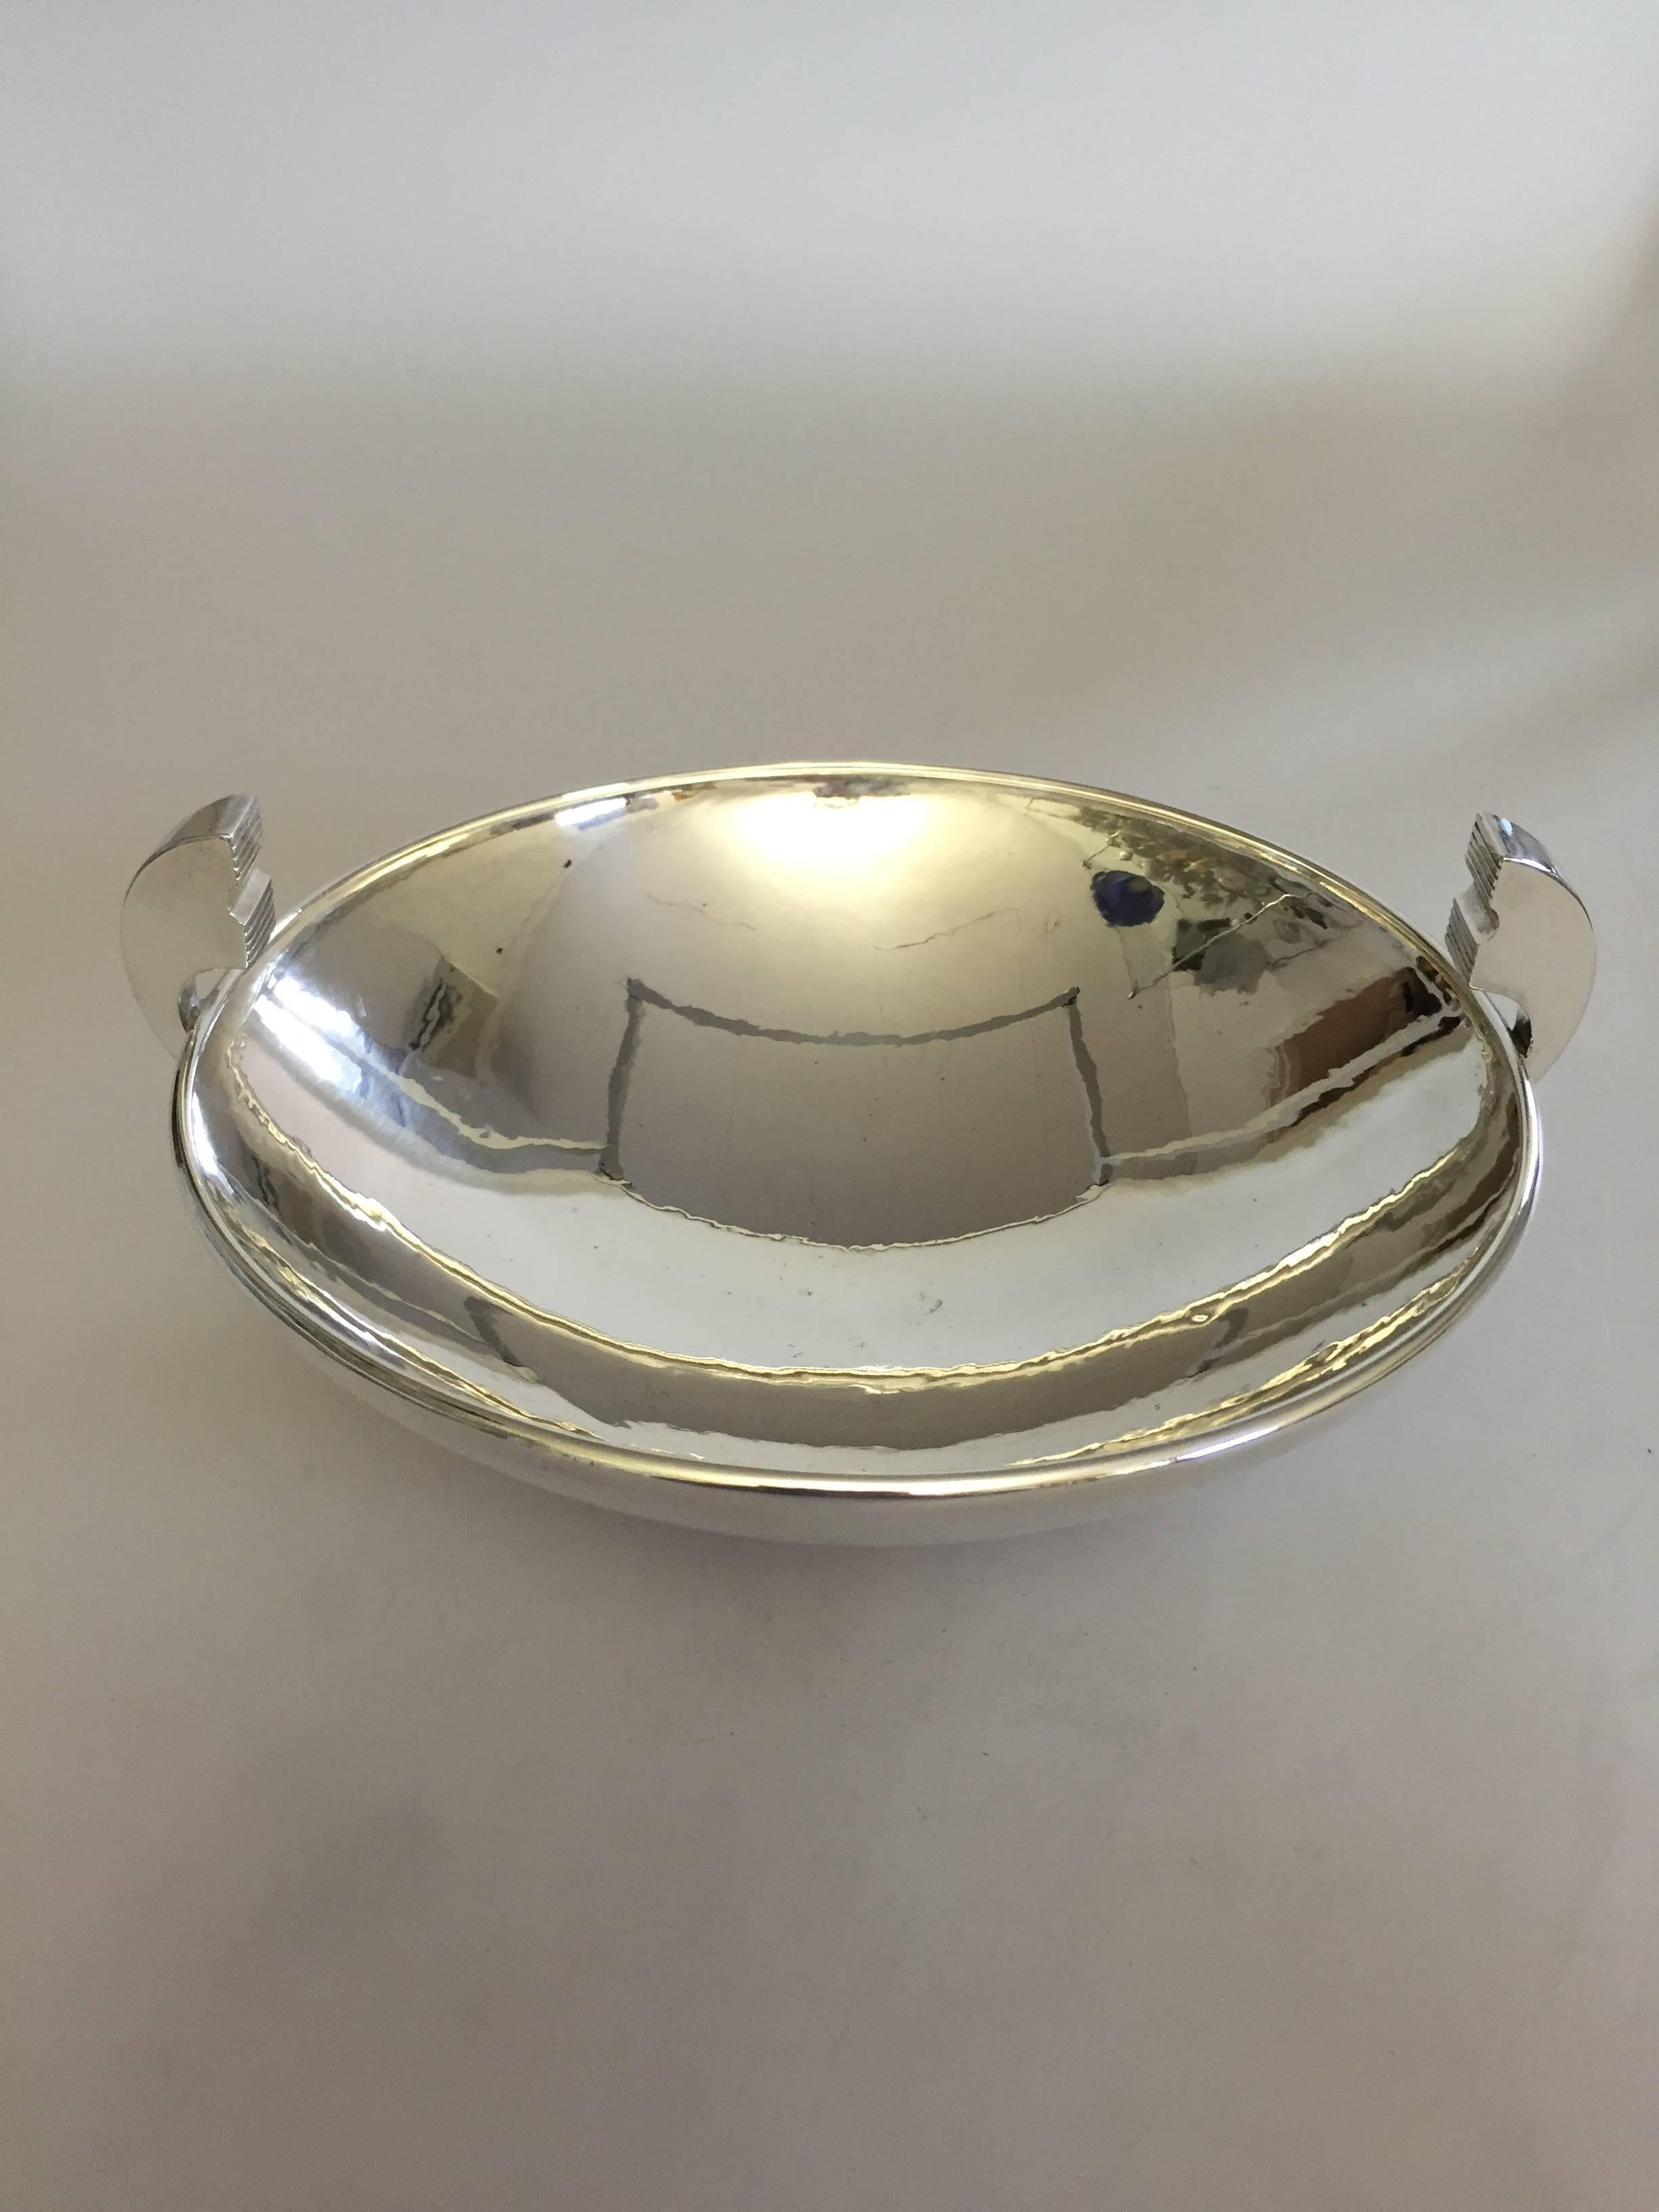 Hans Hansen sterling silver bowl designed by Karl Gustav Hansen. This is from 1936. Measures 10.3 cm high and 23 cm diameter. The bowl is in perfect condition.